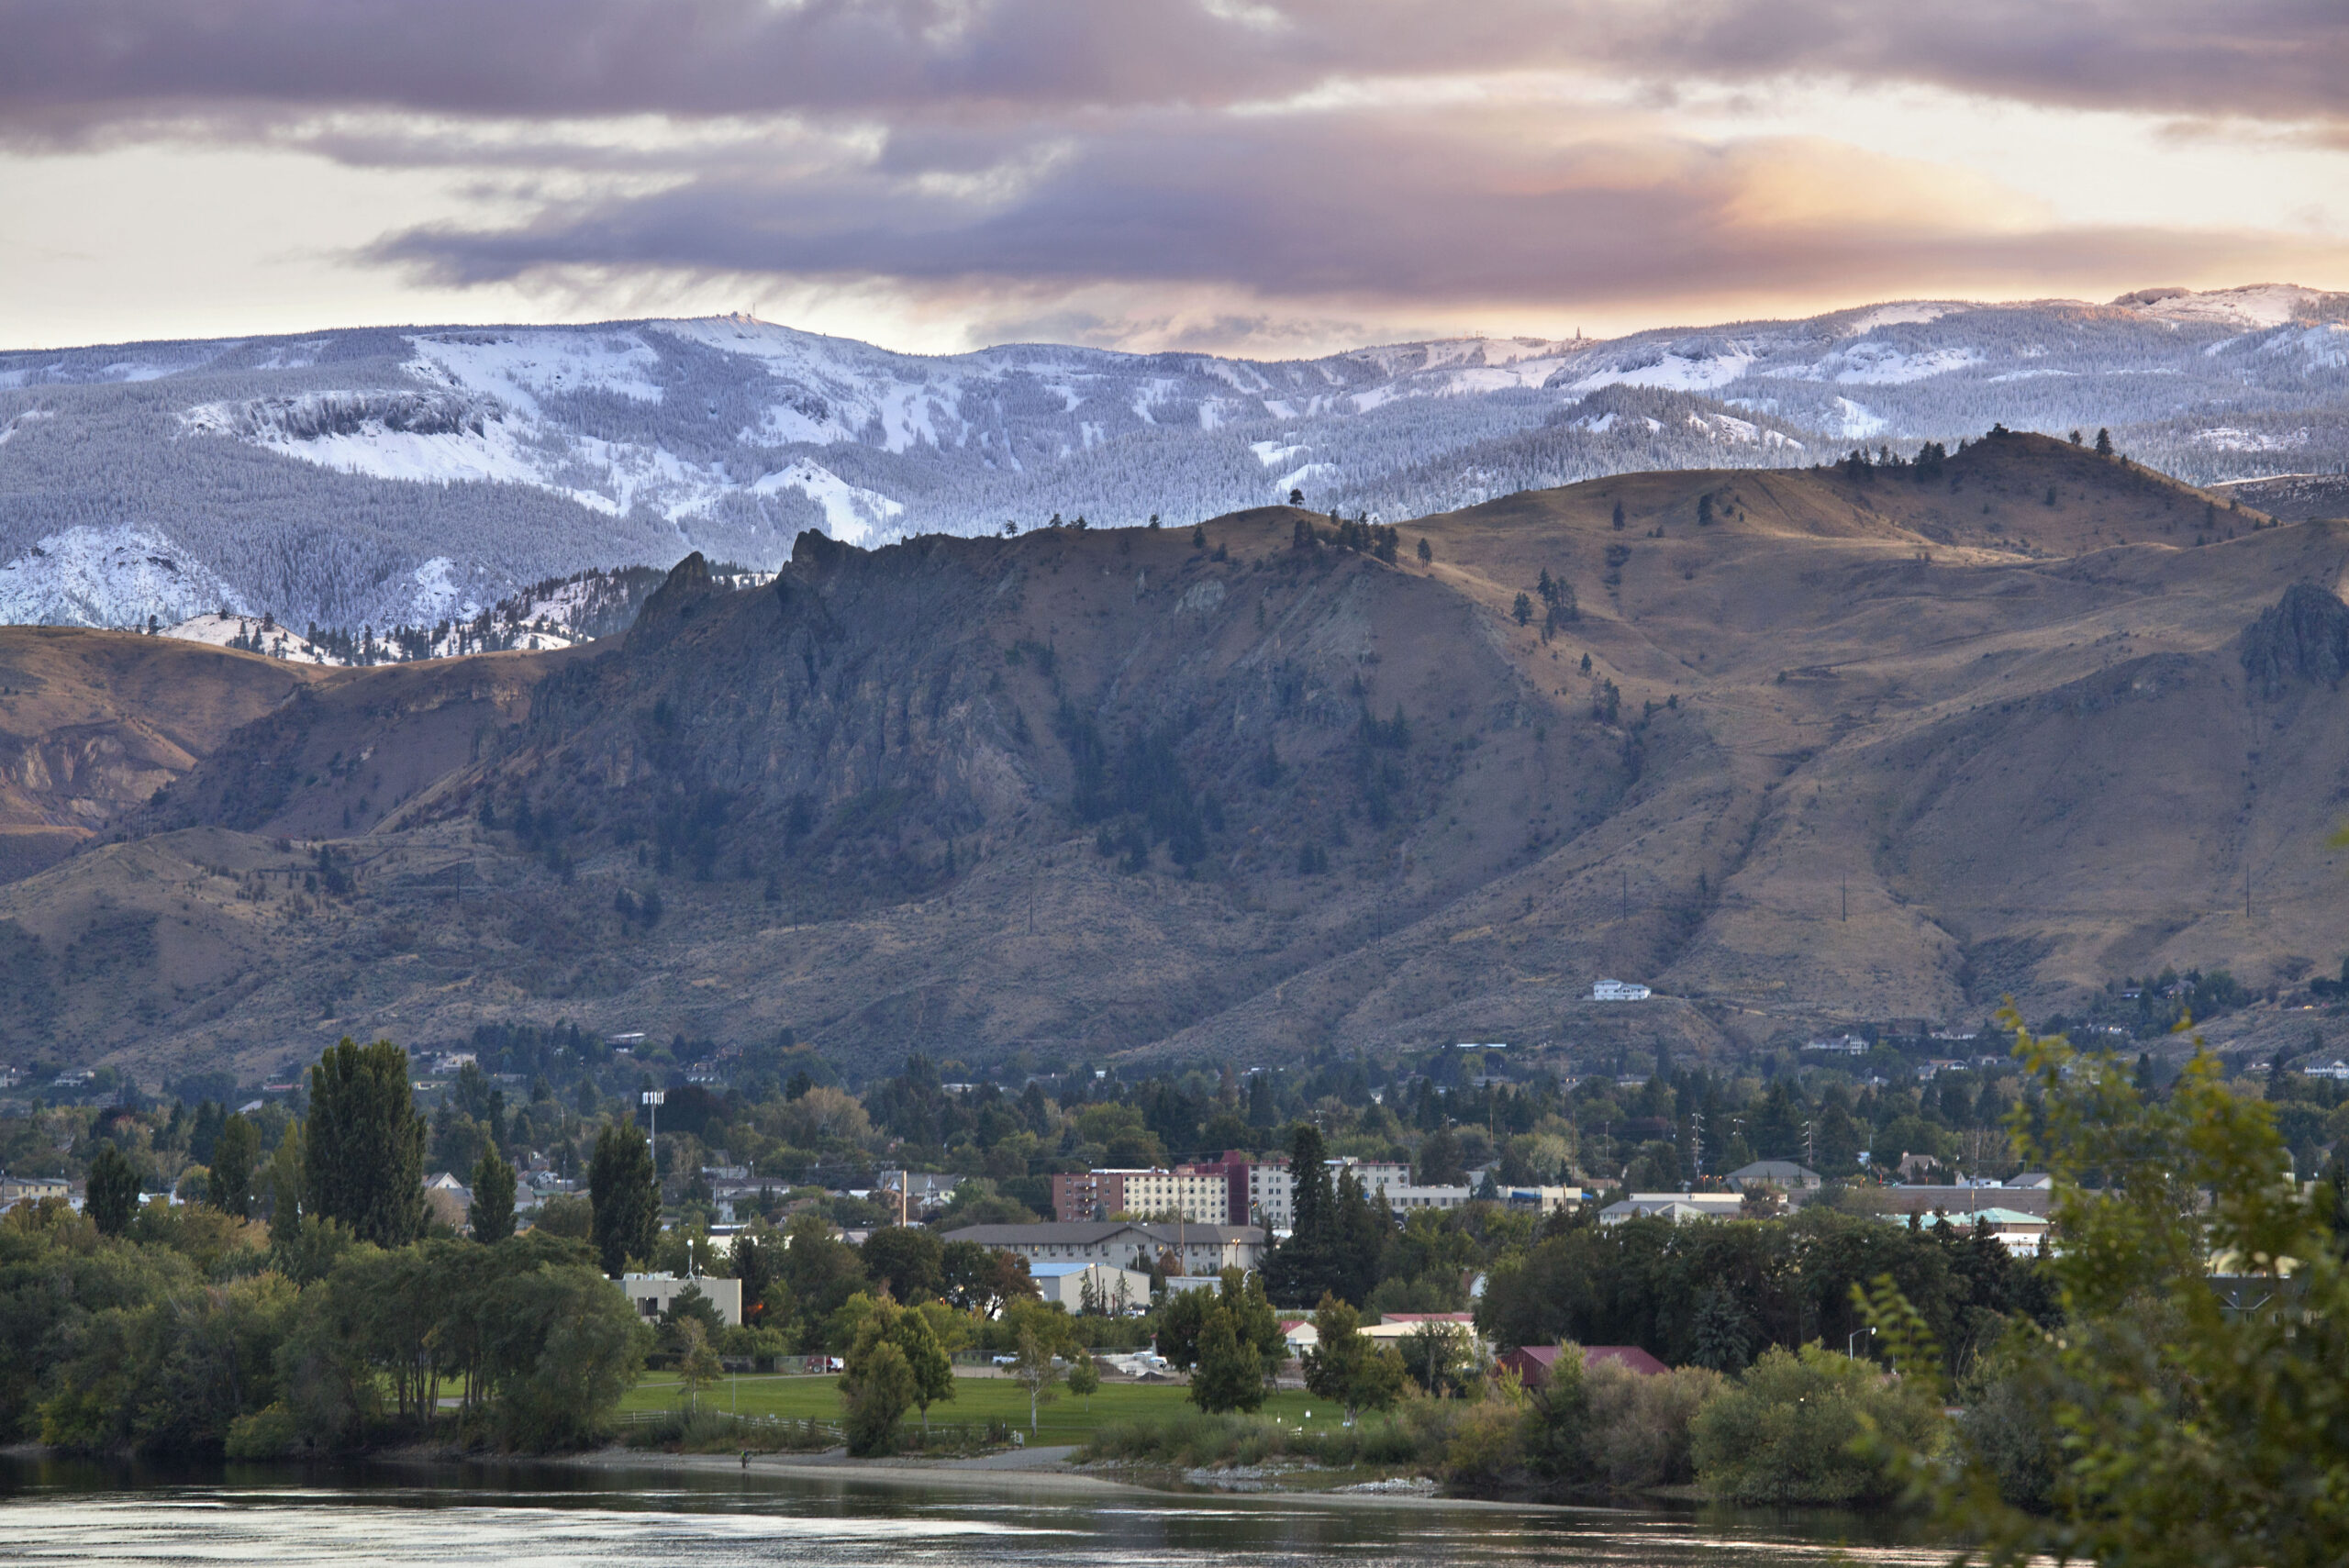 View of Mission Ridge and Wenatchee in the Spring. Wenatchee is green with new growth and Mission Ridge is covered in snow.